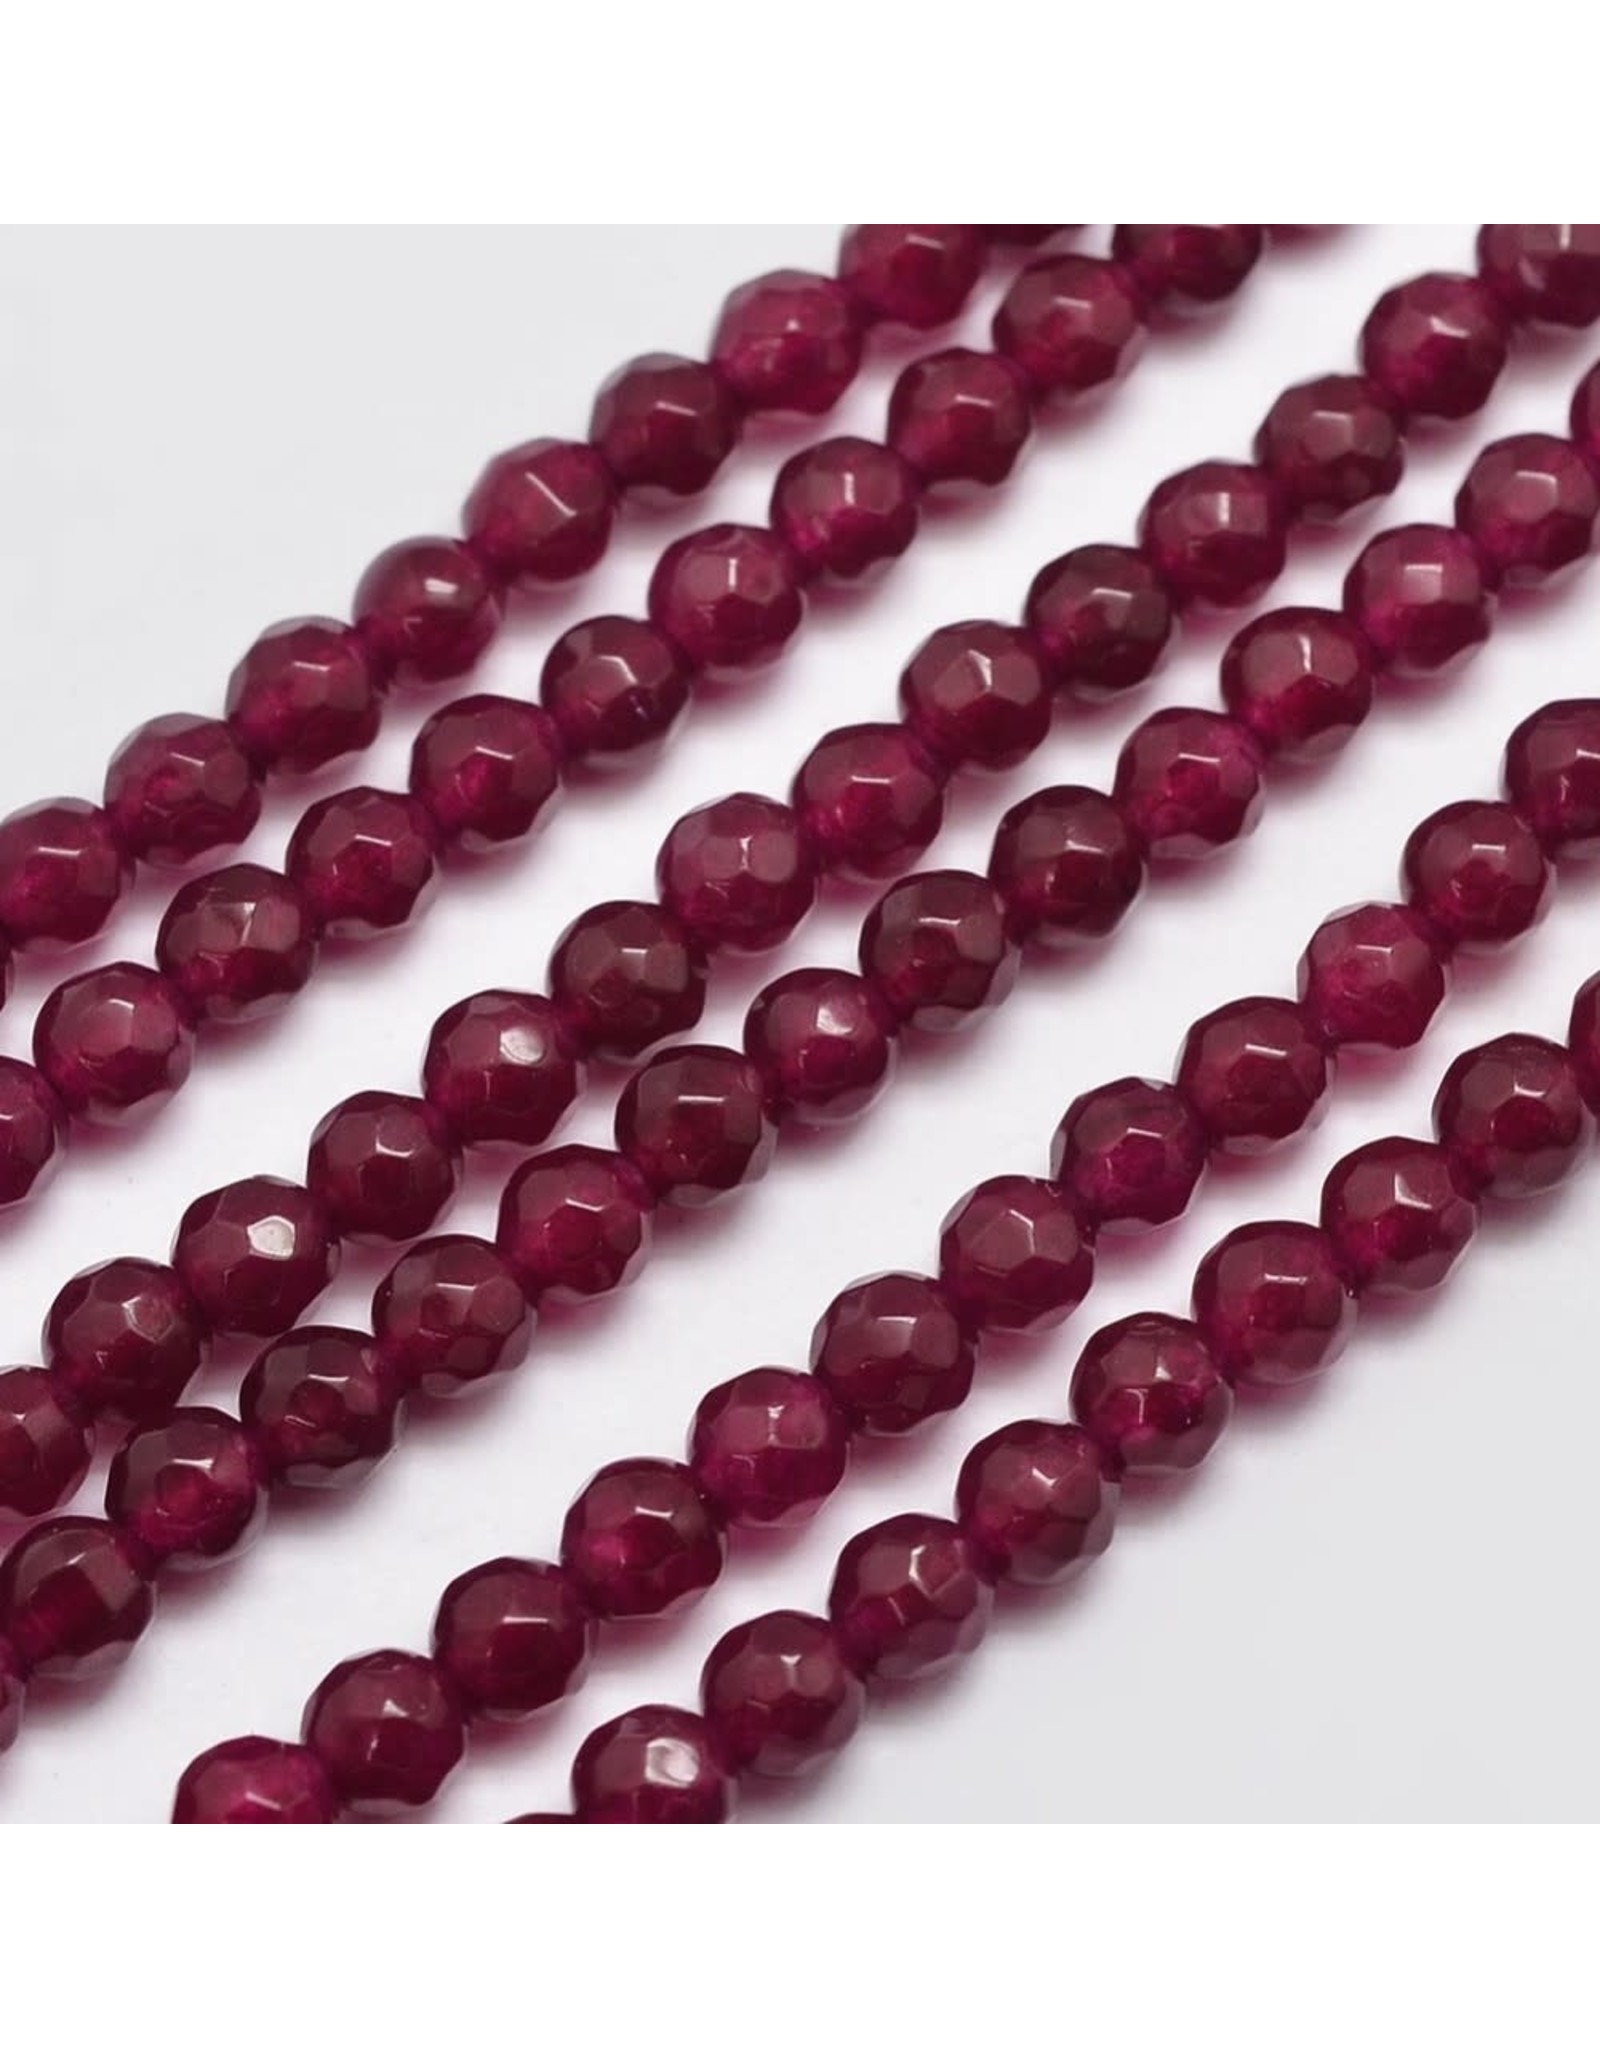 Malaysia Jade Dyed 4mm Faceted Ruby  15” Strand  apprx 90 beads